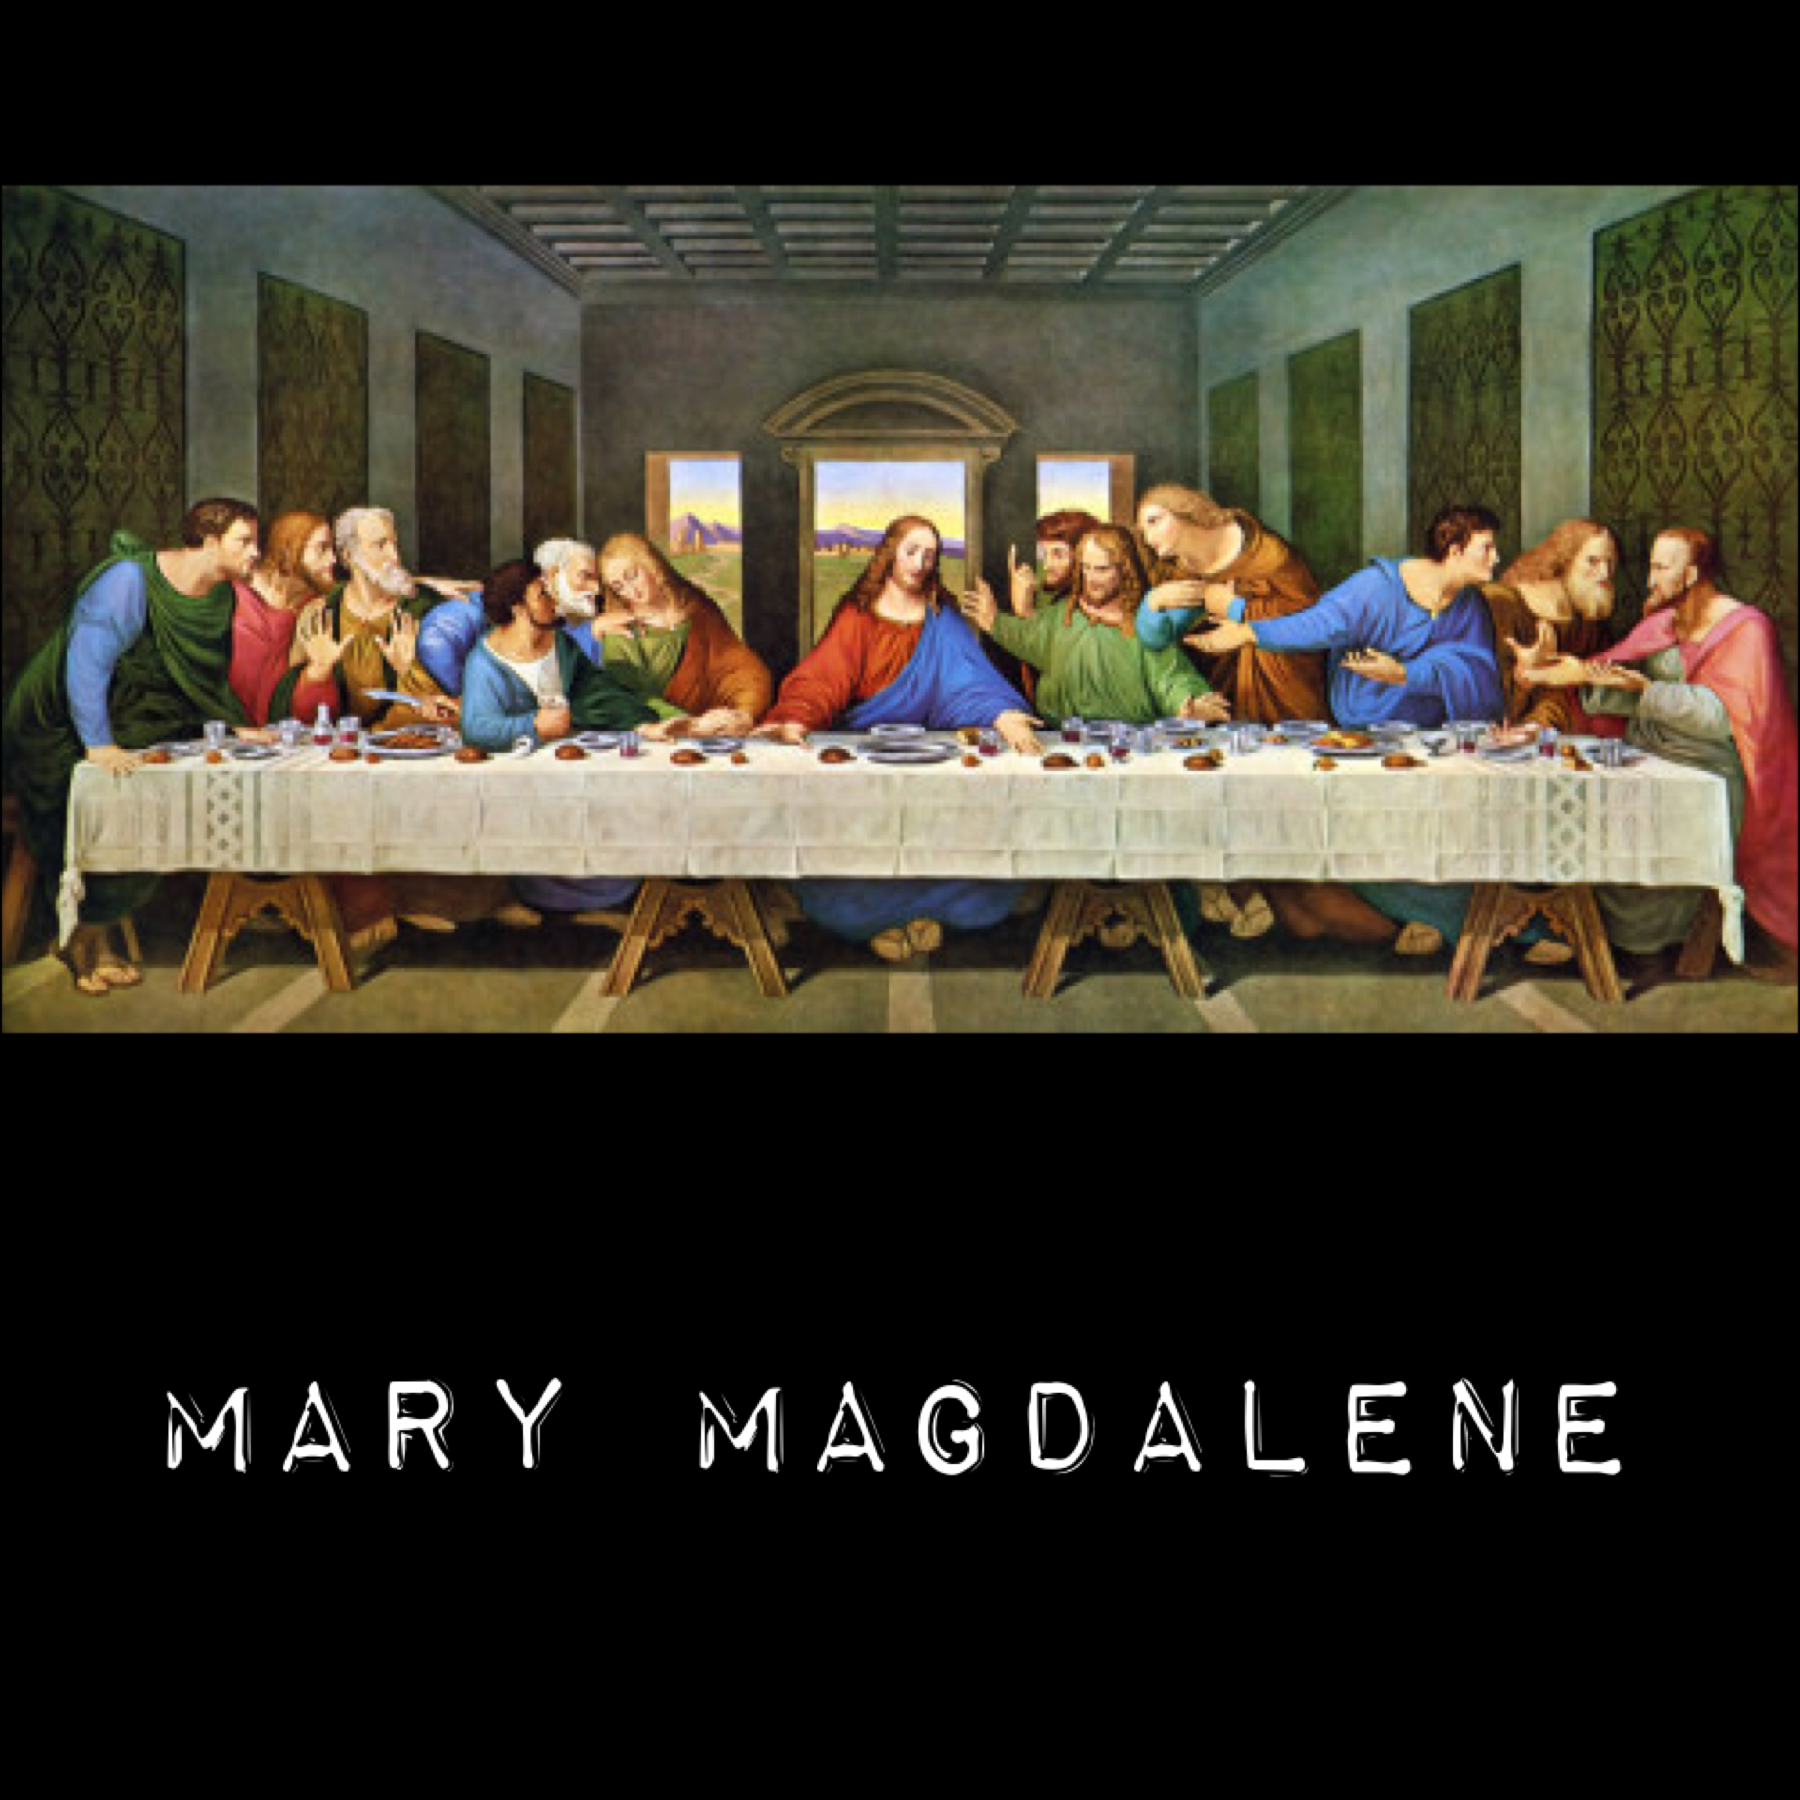 The Only Girl at the Table (Mary Magdalene) — WELL-BEHAVED WOMEN